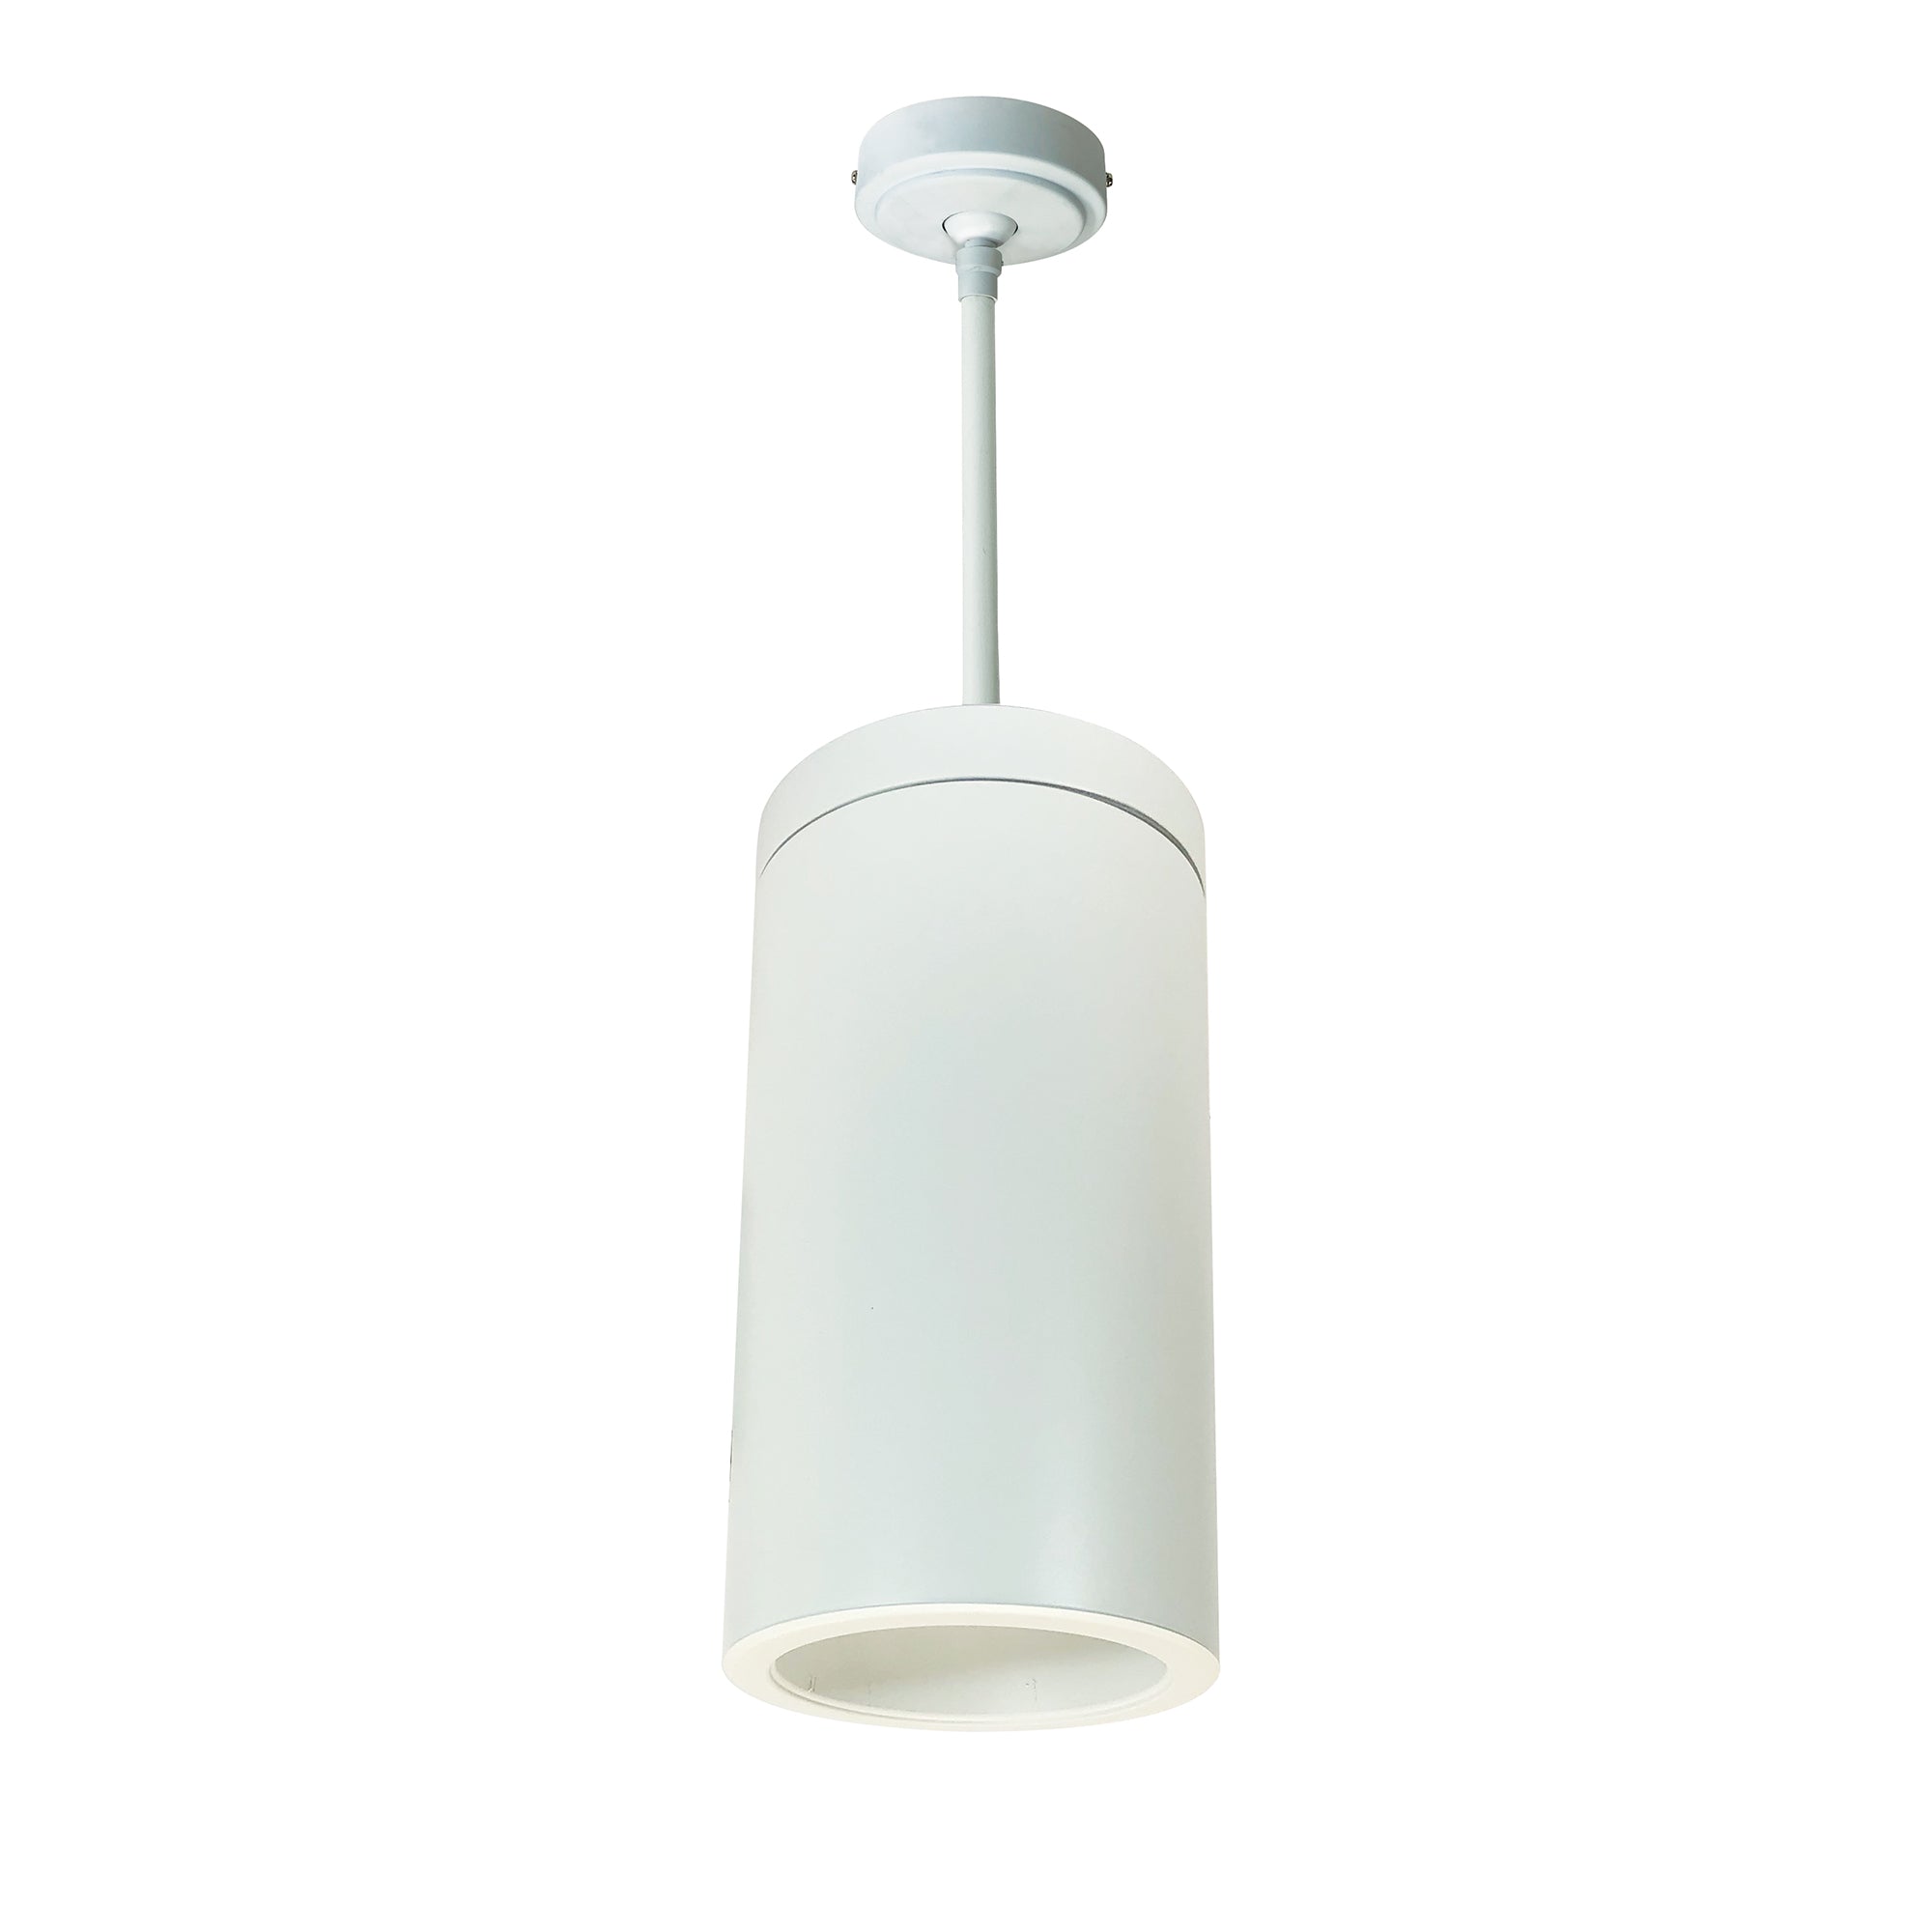 Nora Lighting LE45 - NYLS2-6P15130MWWW6 - Cylinder - White